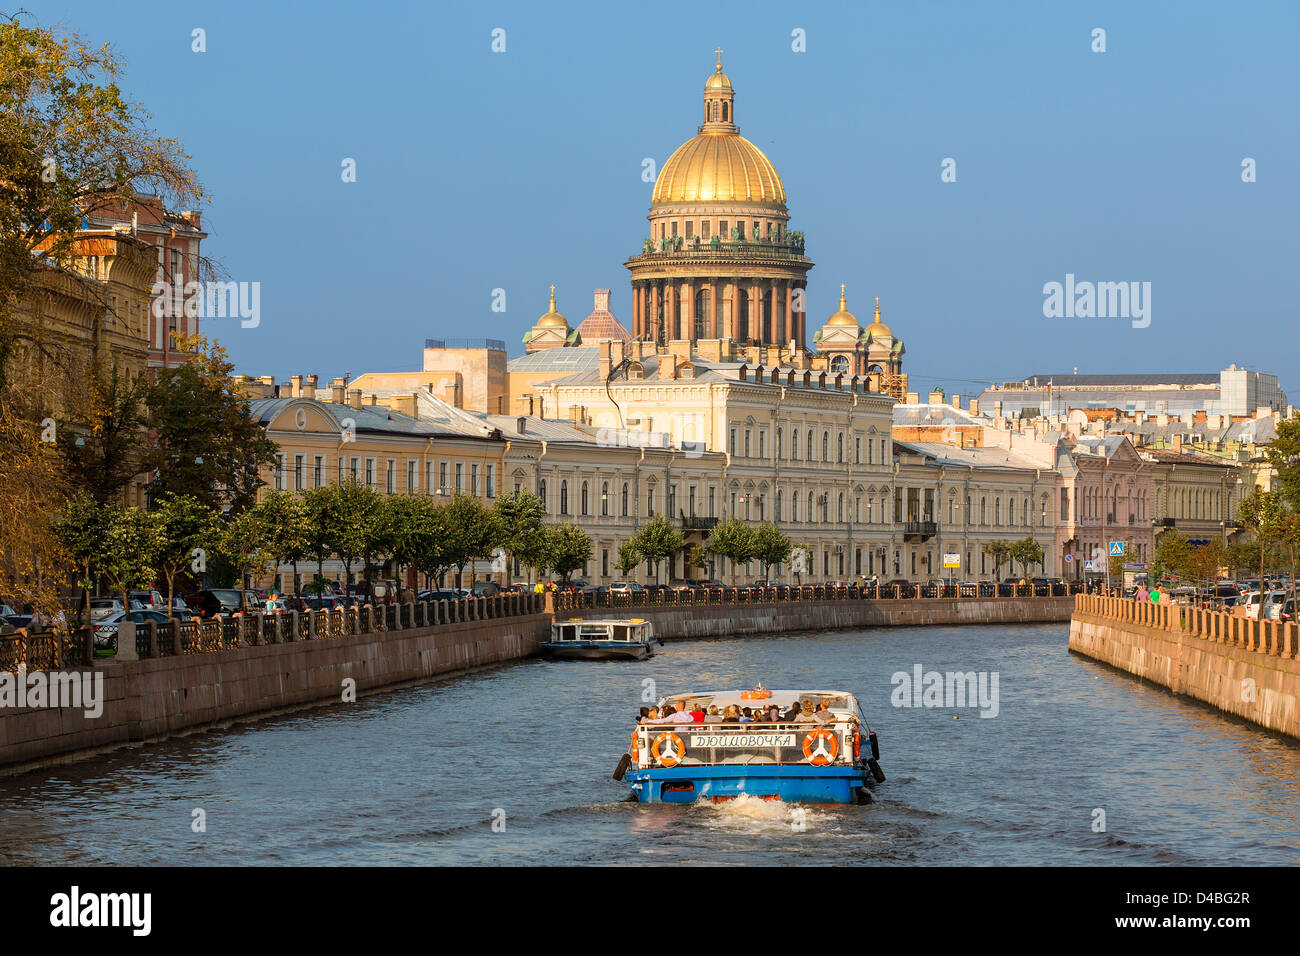 St. Petersburg, St. Isaac's Cathedral over Moyka River Stock Photo